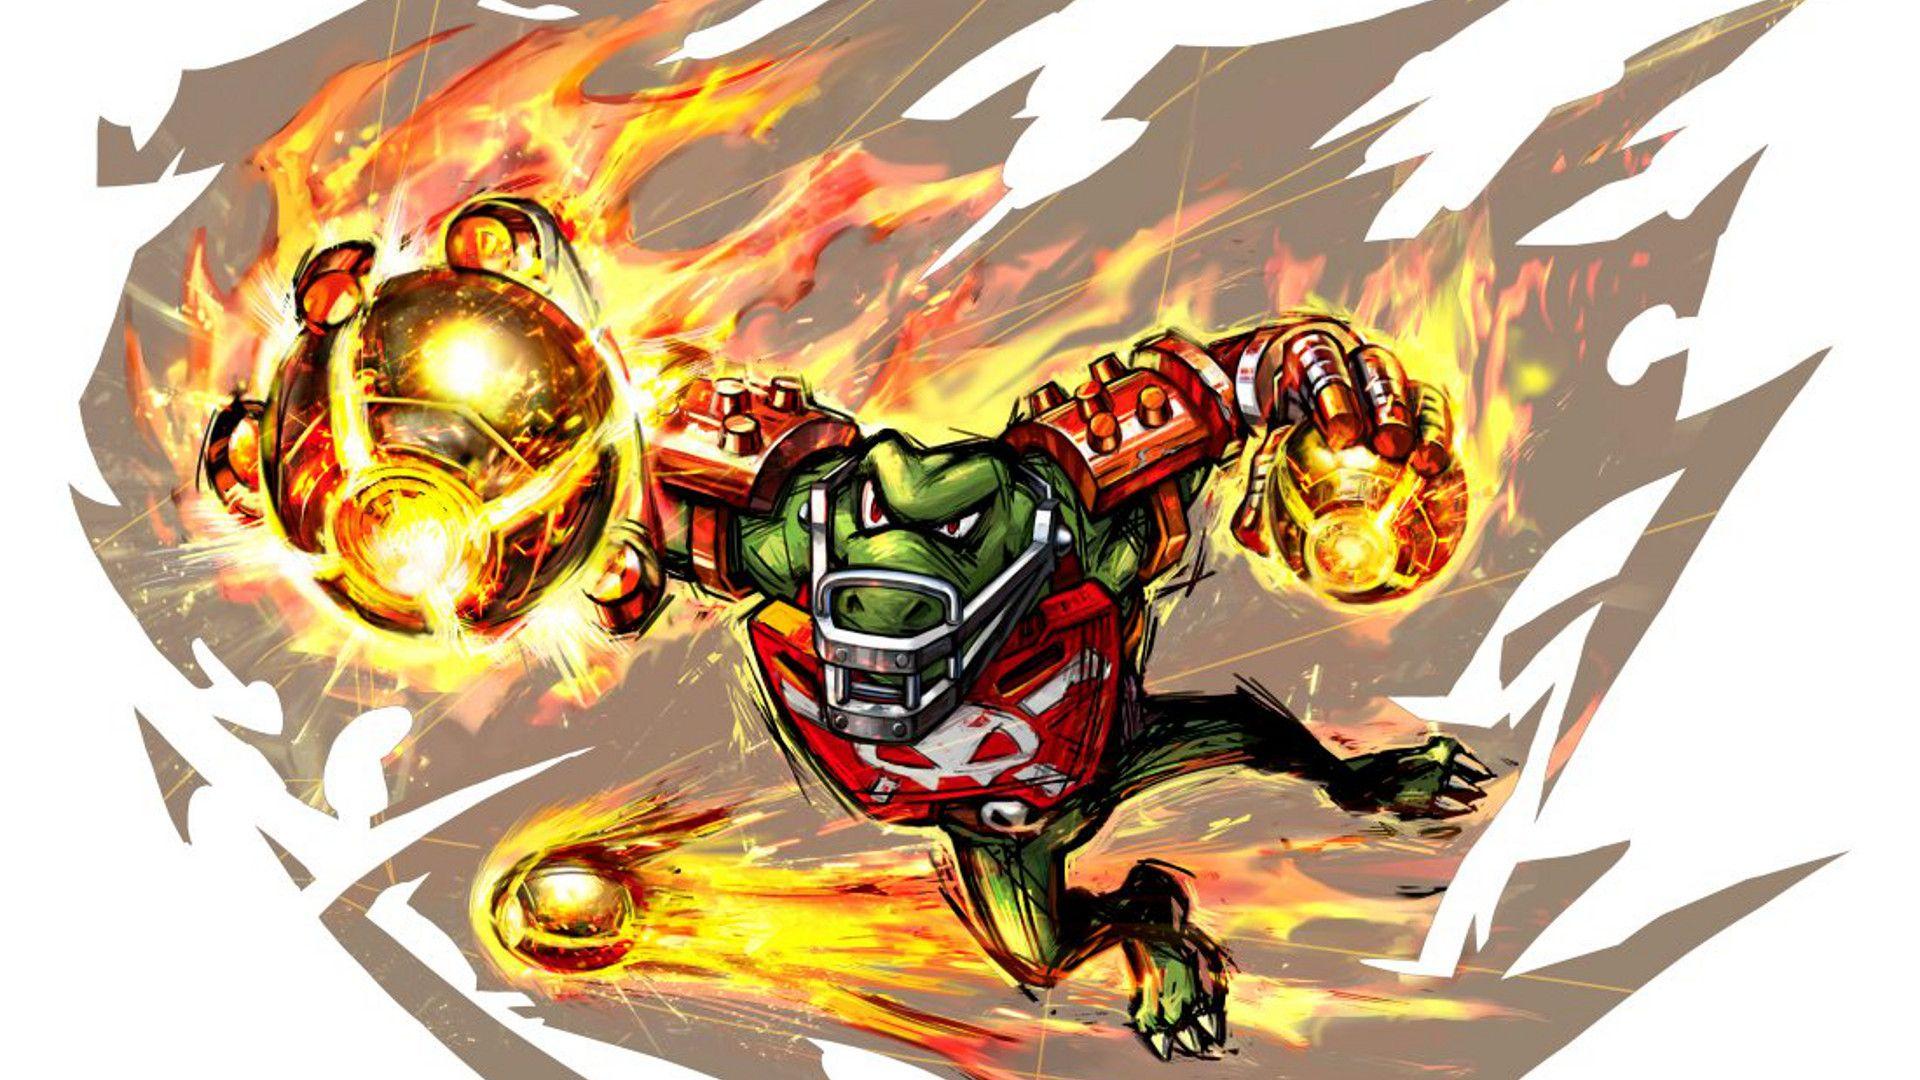 Mario Strikers Charged Full HD Wallpaper